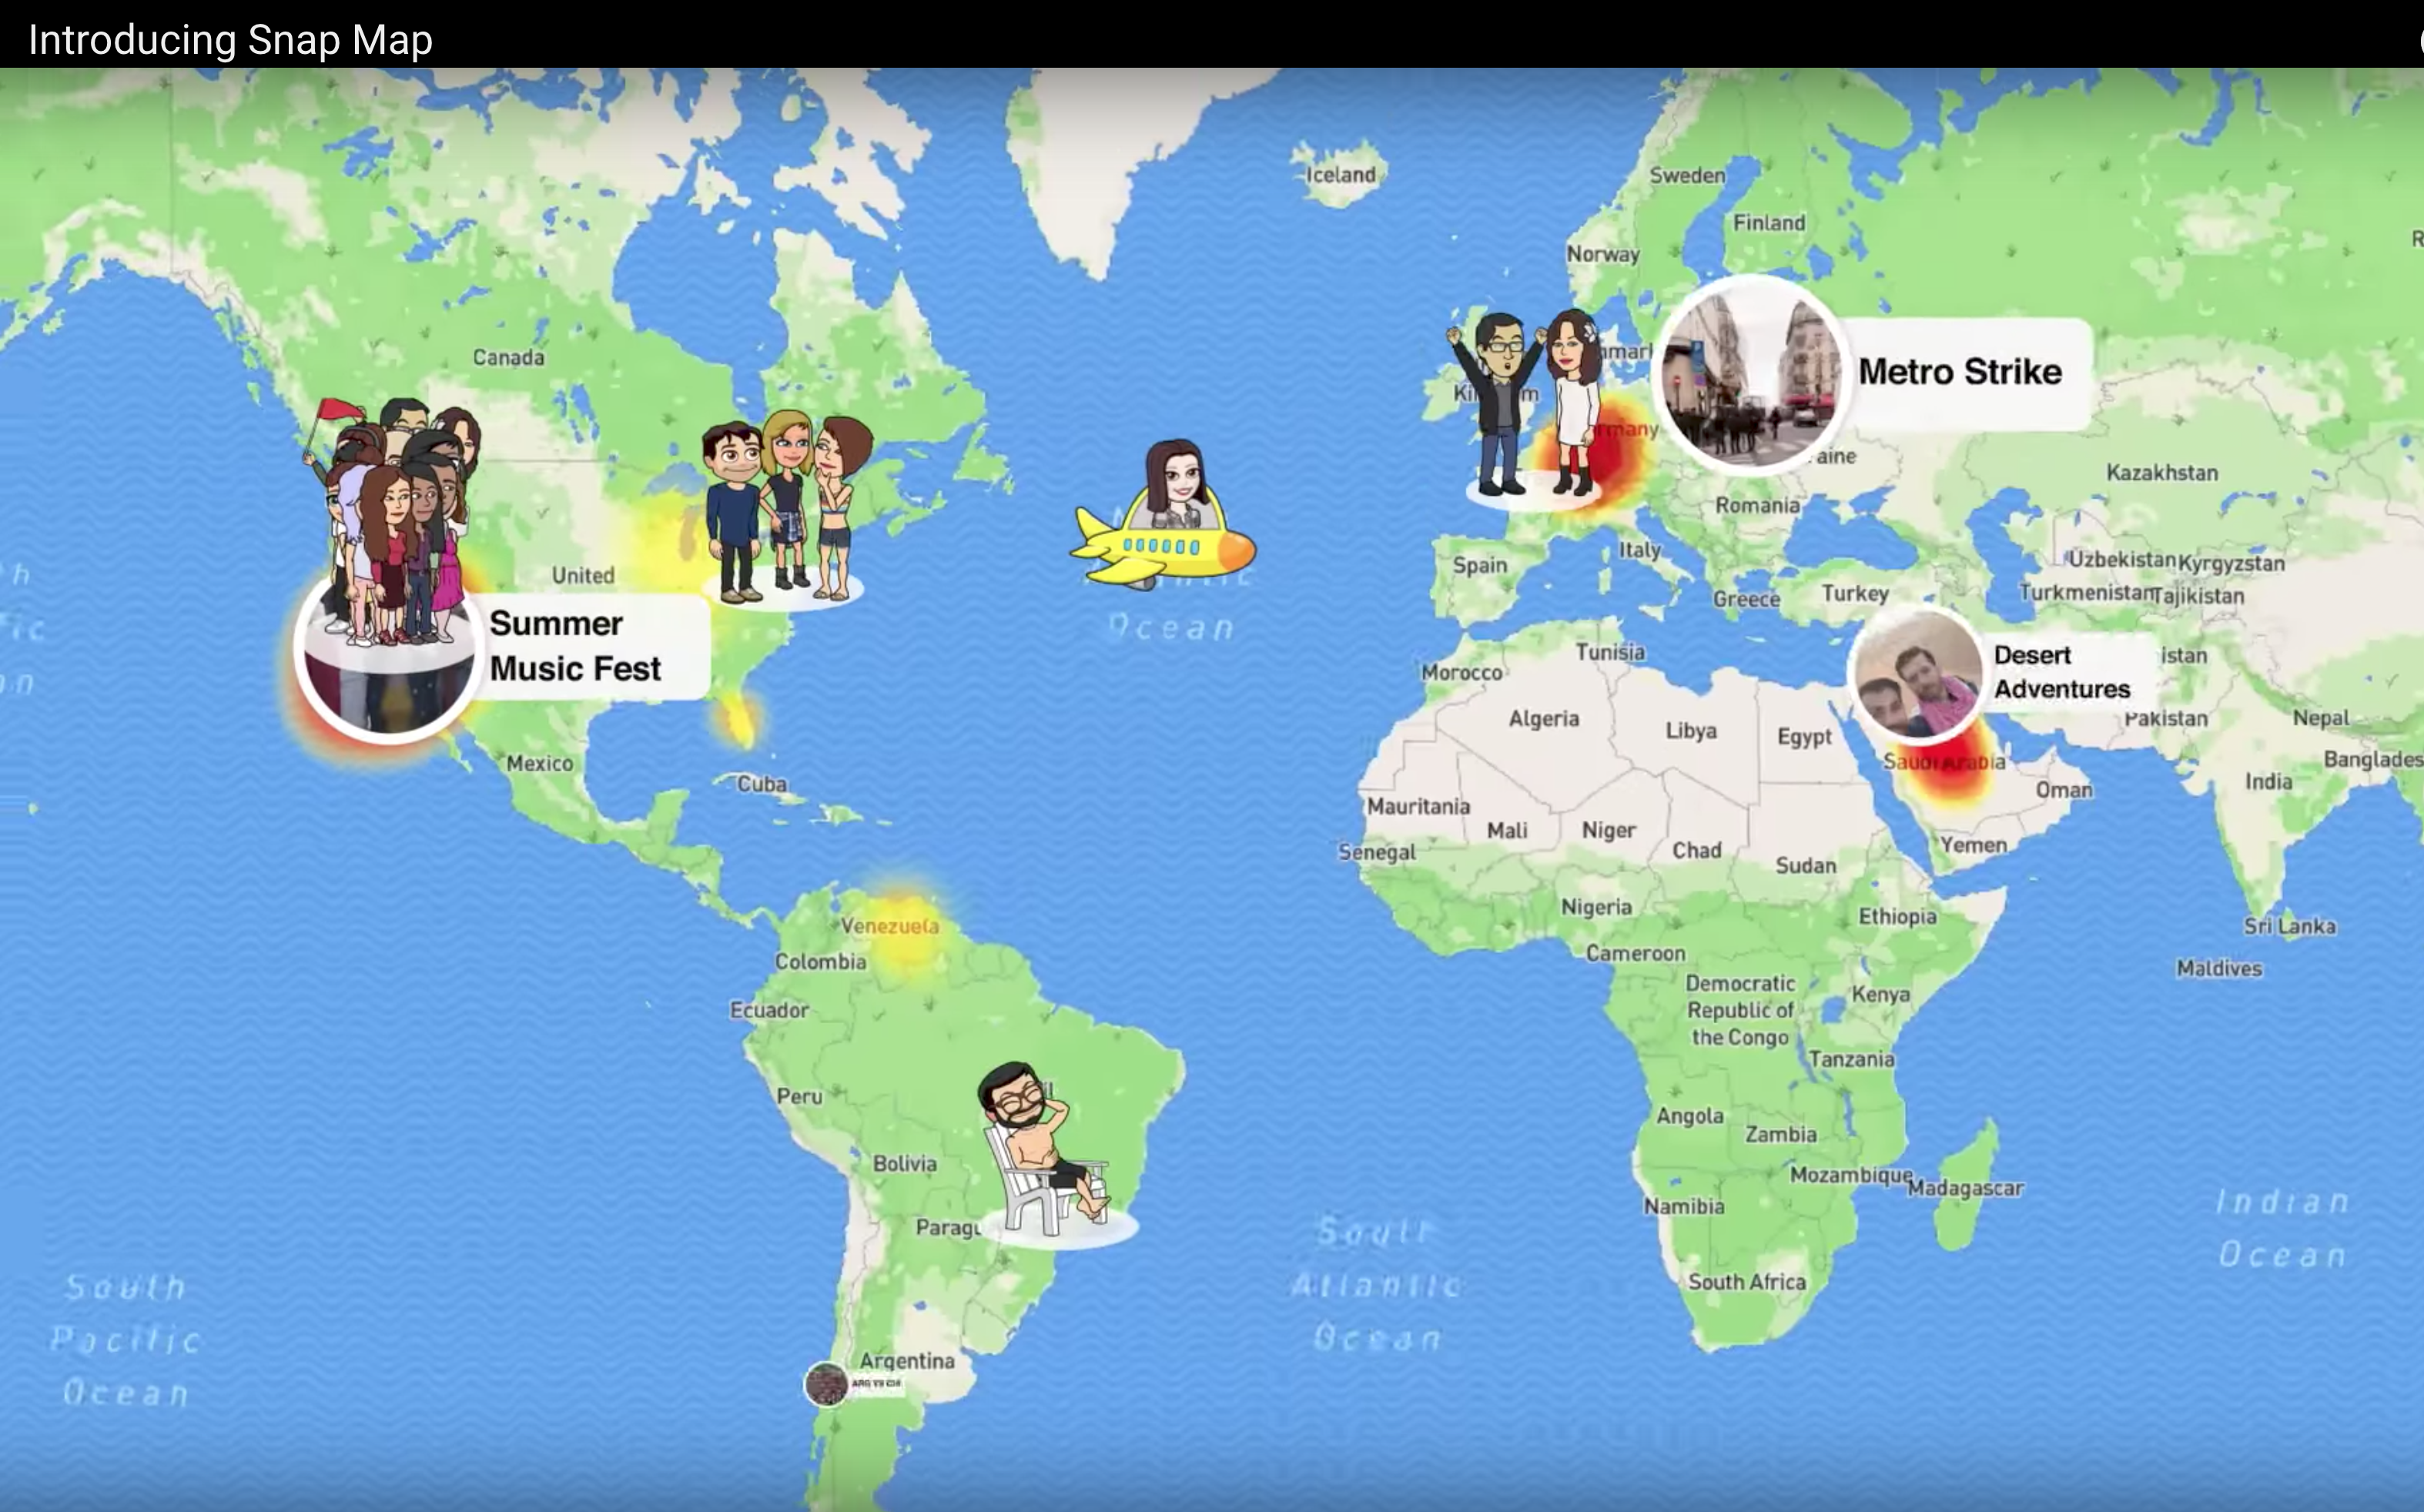 SnapChat adds location sharing feature 'Snap Map' - just be careful who